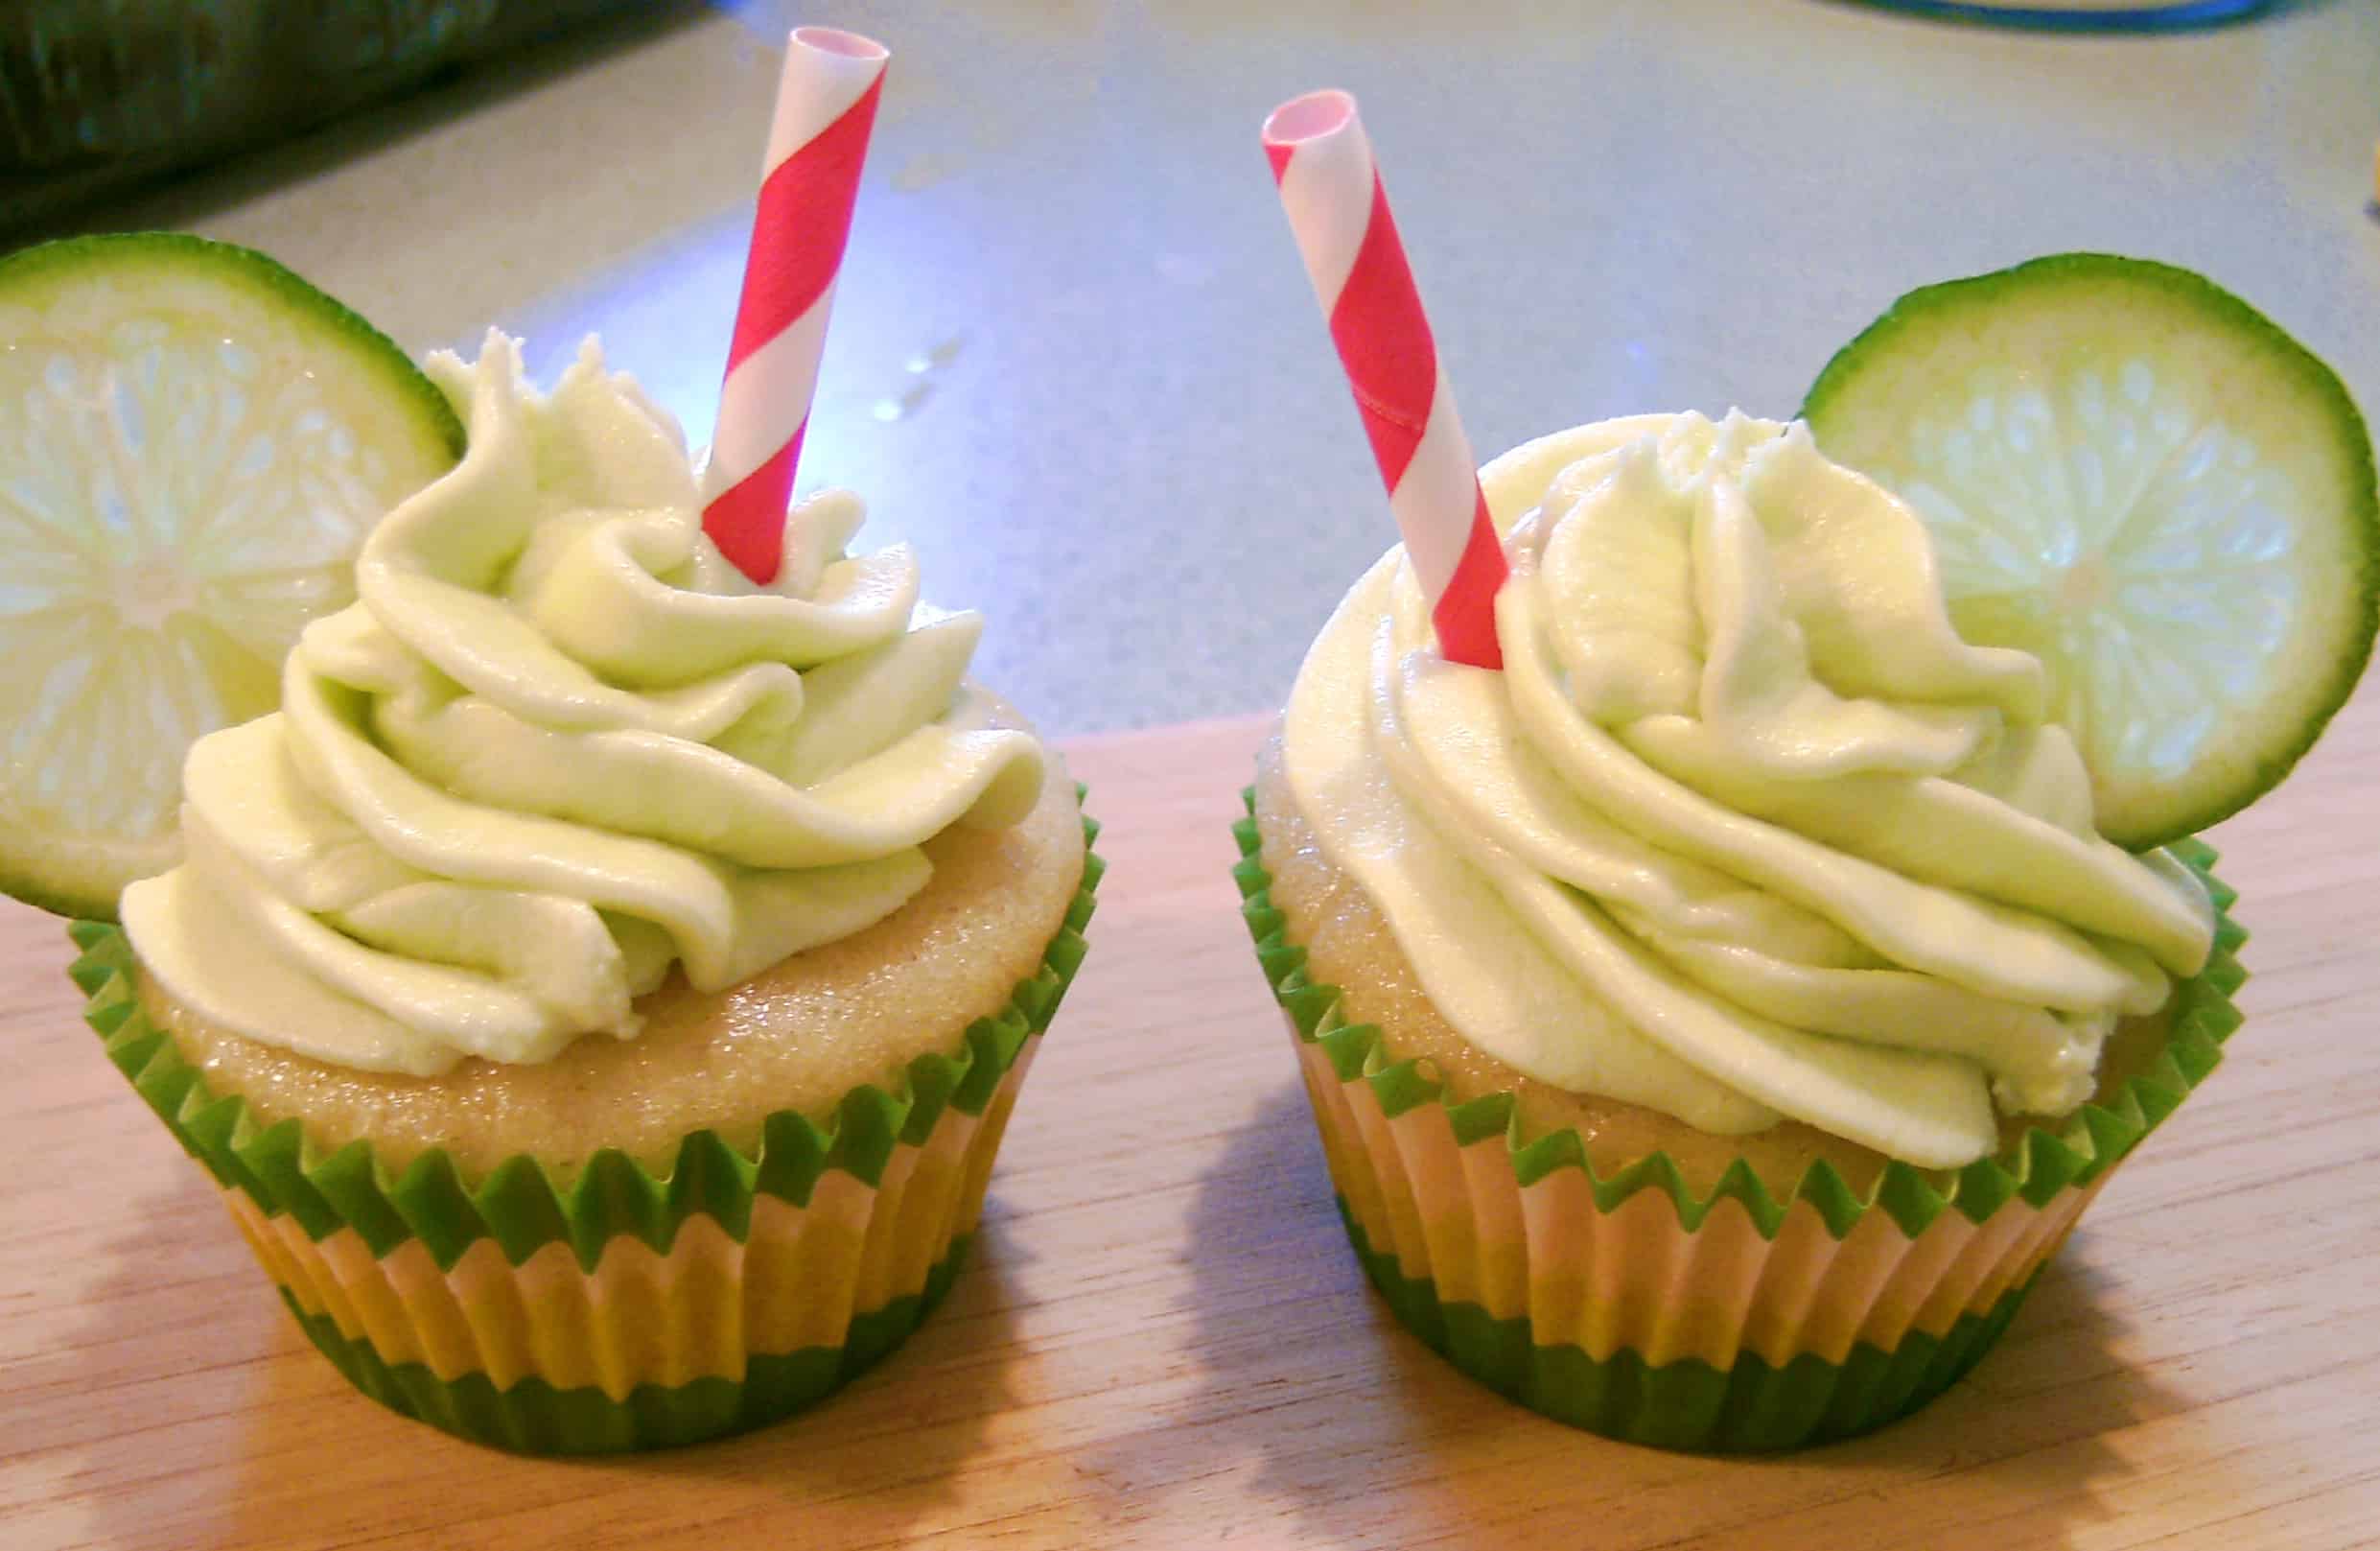 TrendMantra article_512_5 Alcoholic Cupcakes: These Alcohol-Infused Cupcakes Are All You Need Today! 